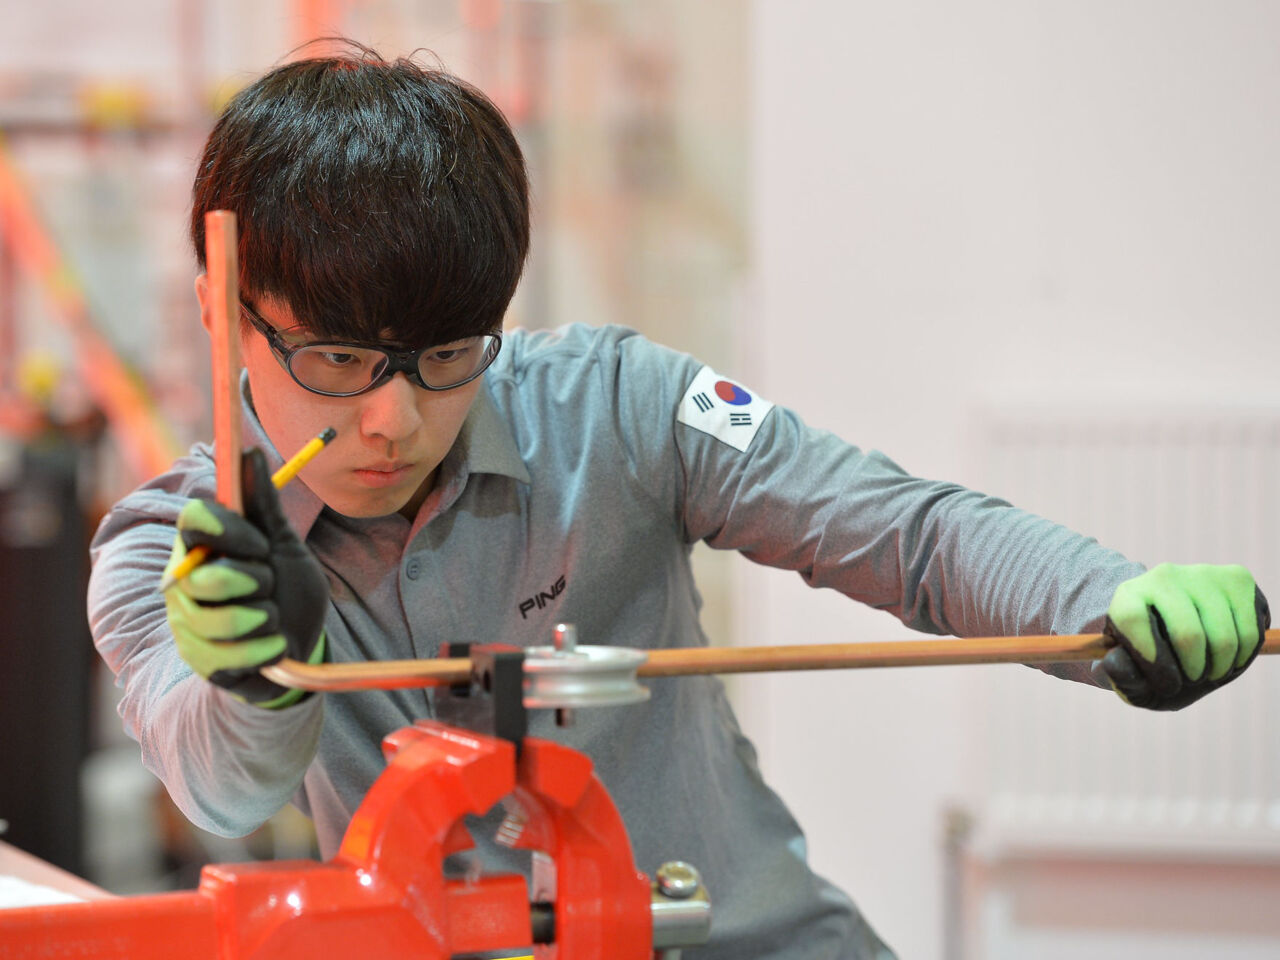 A plumbing and heating competitor from Korea at WorldSkills Kazan 2019.